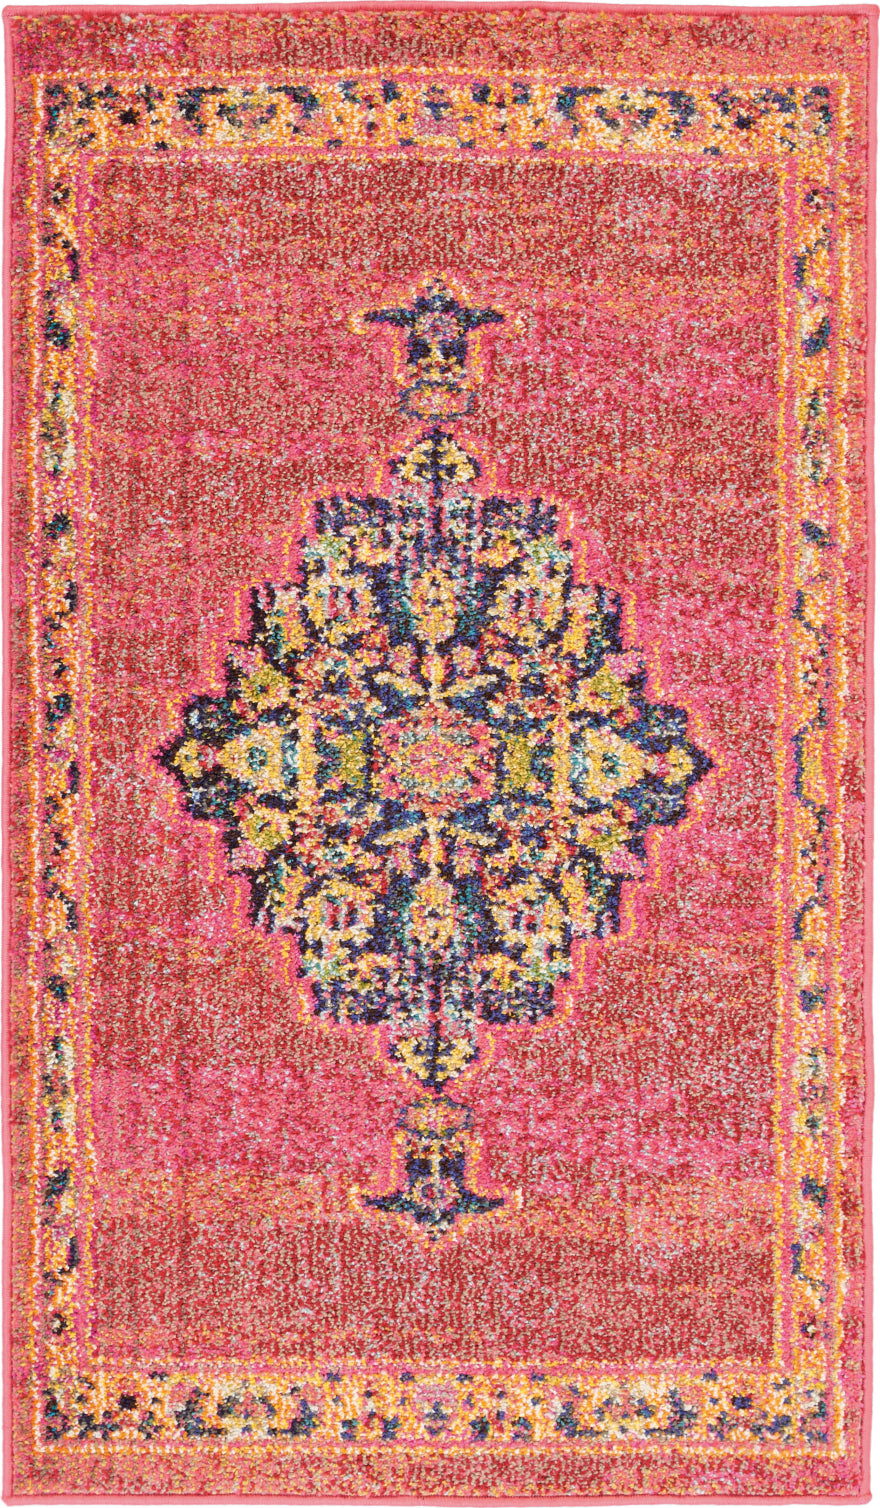 Nourison Passionate PST01 Pink/Flame Area Rug Main Image